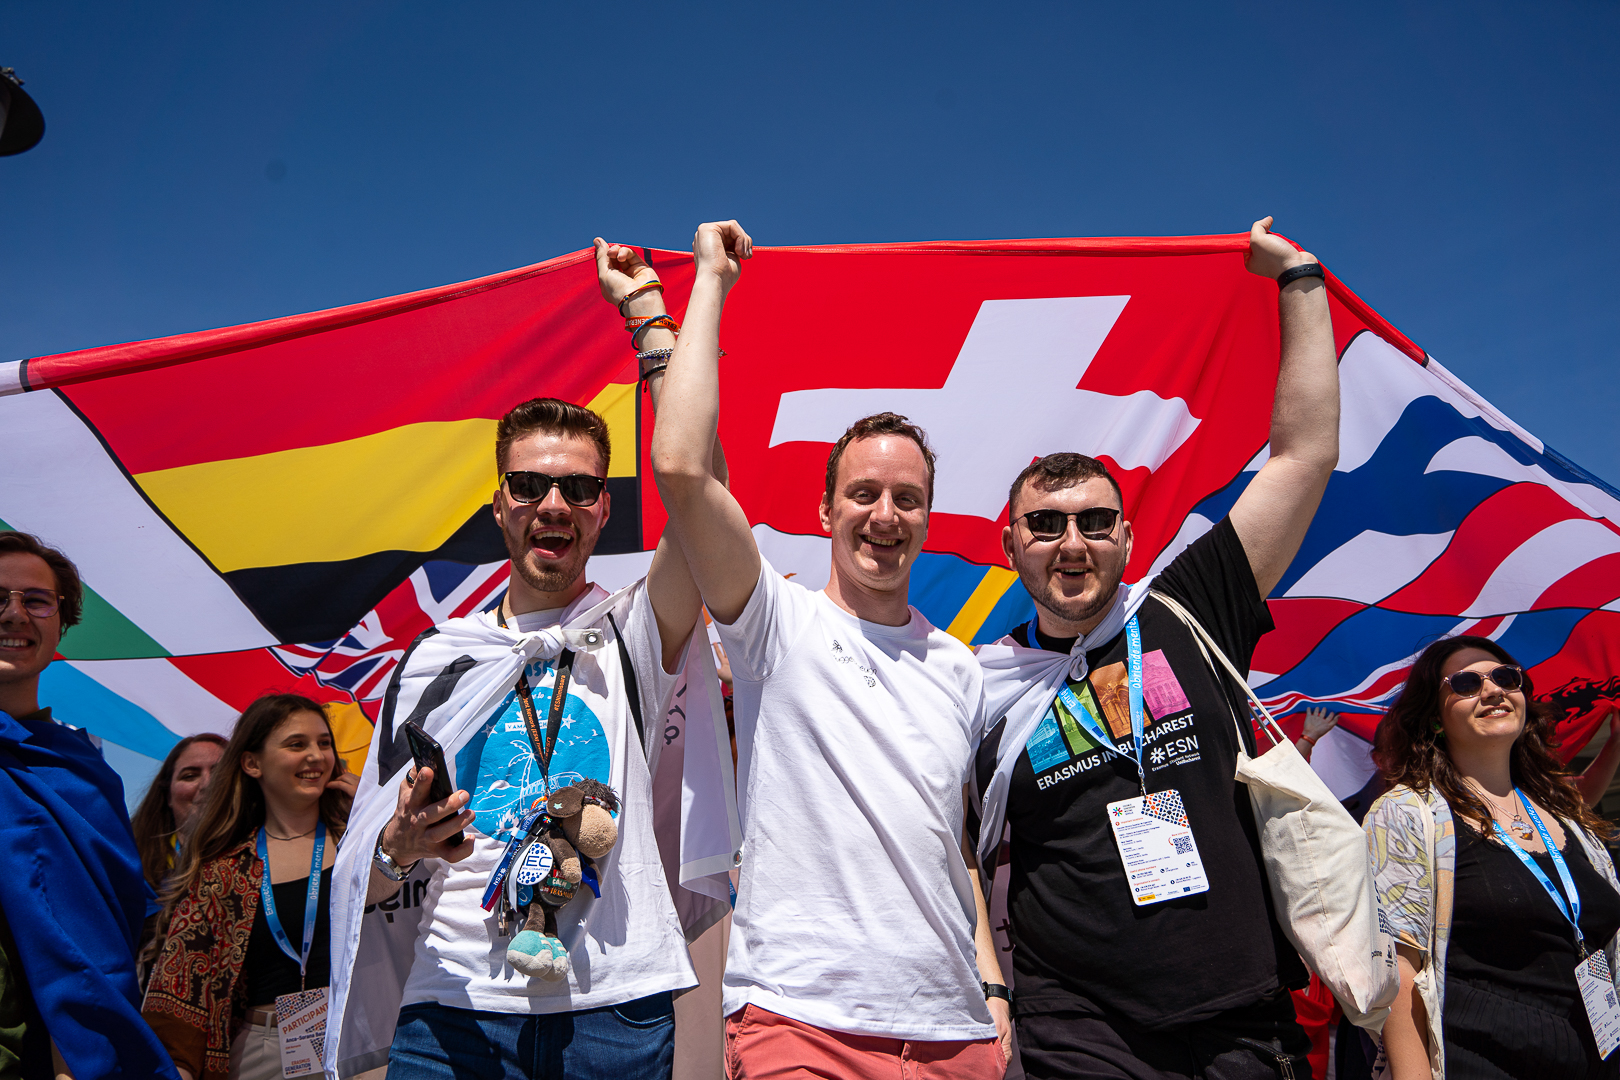 A group of young people holding a big flag made of many other country flags.